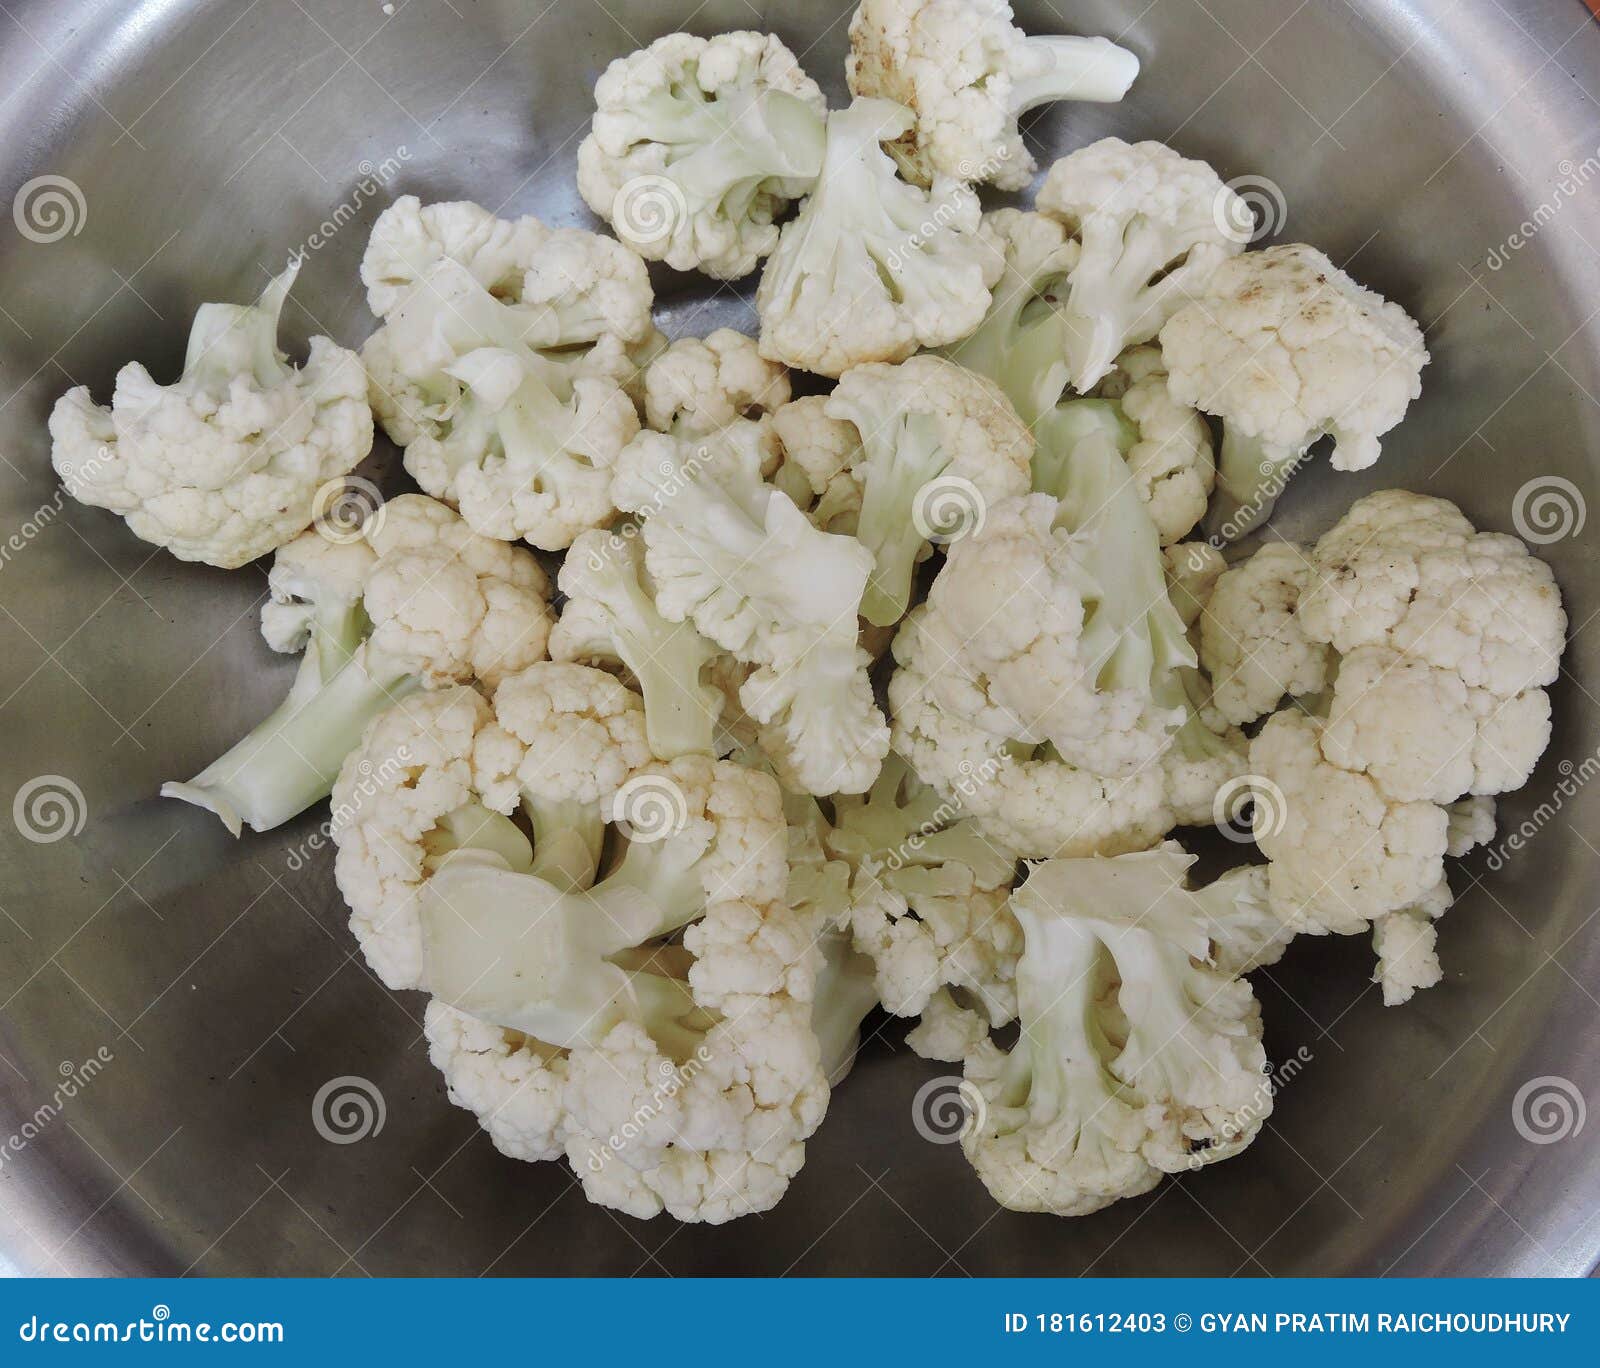 cauliflower pieces kept in a container.